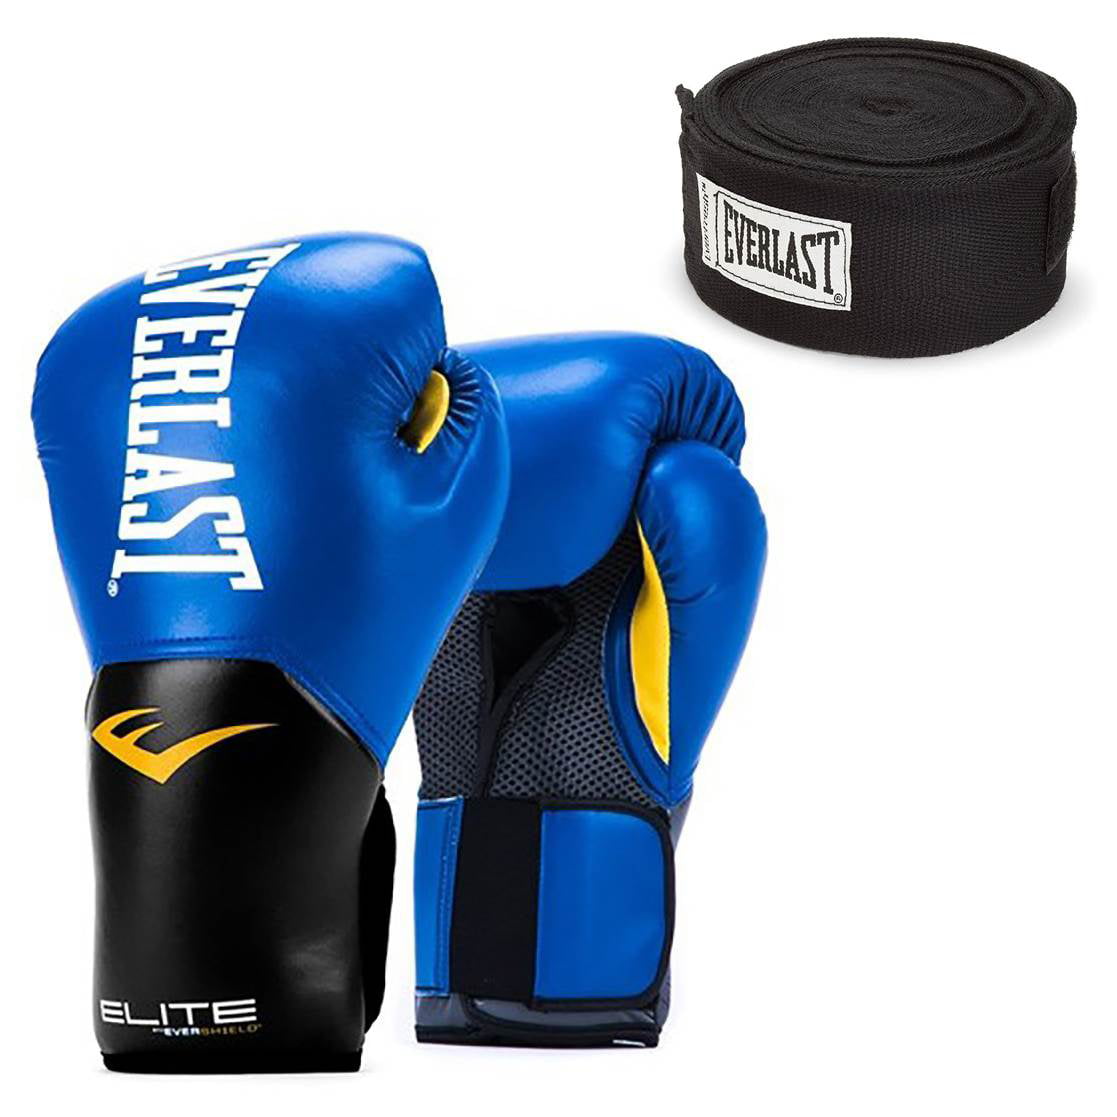 MMA 7 Ounce Pro Gloves White/Blue 